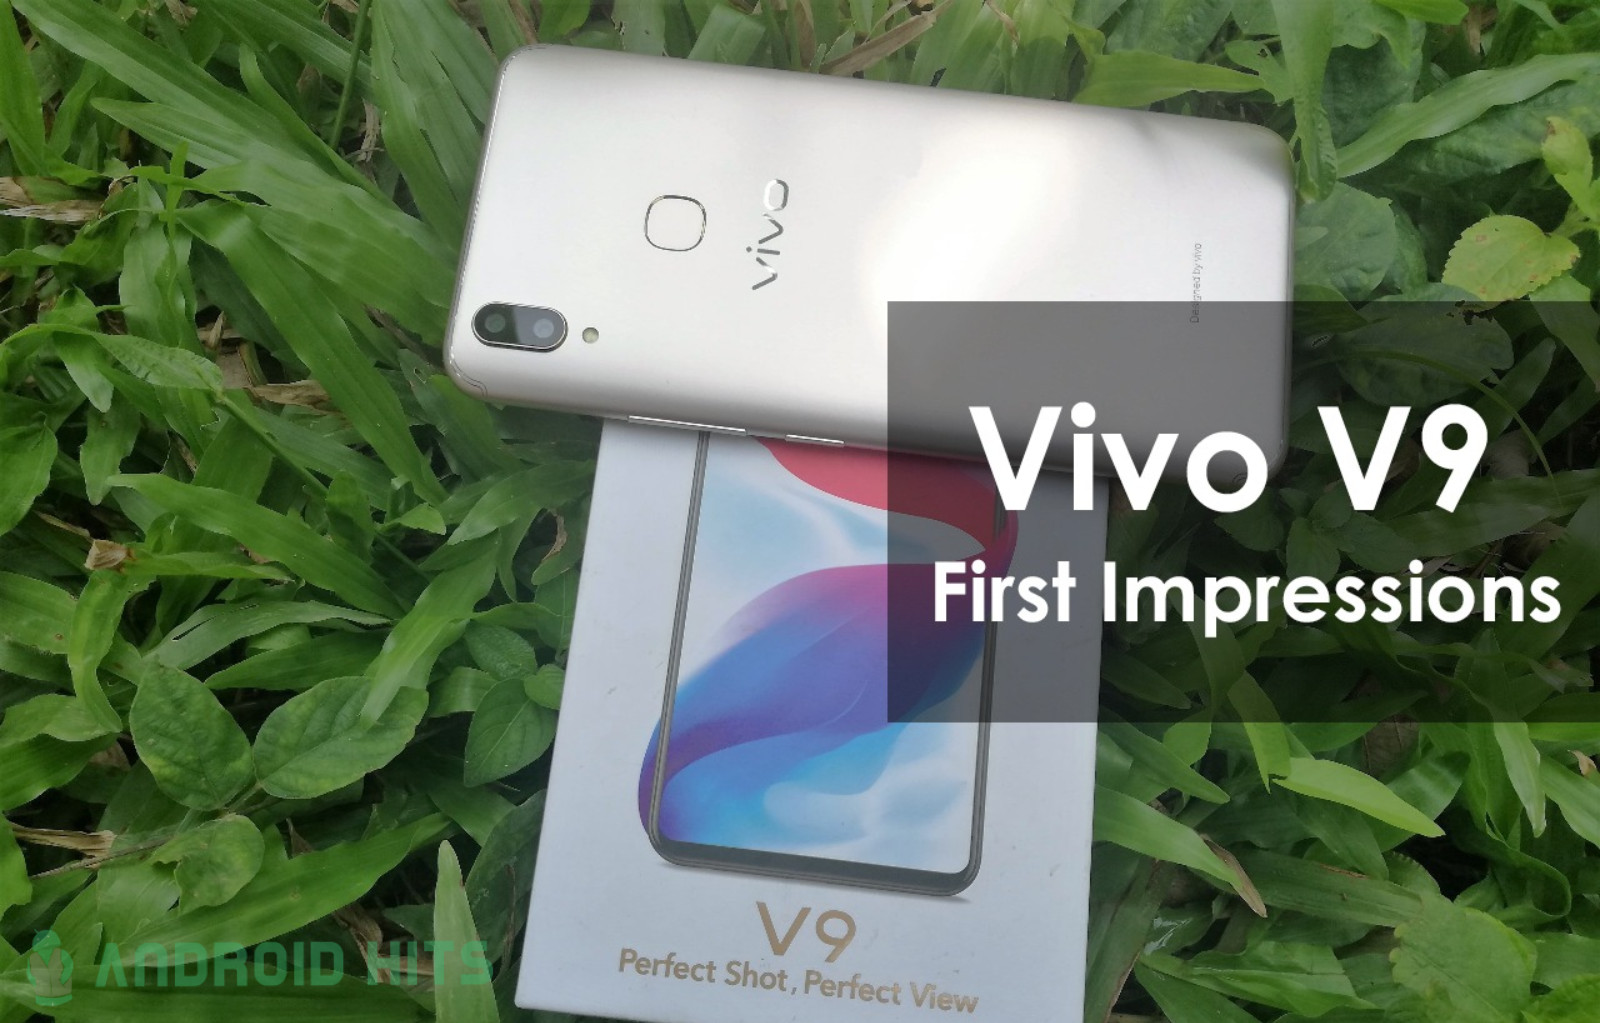 Vivo V9 First Impressions and overview 2